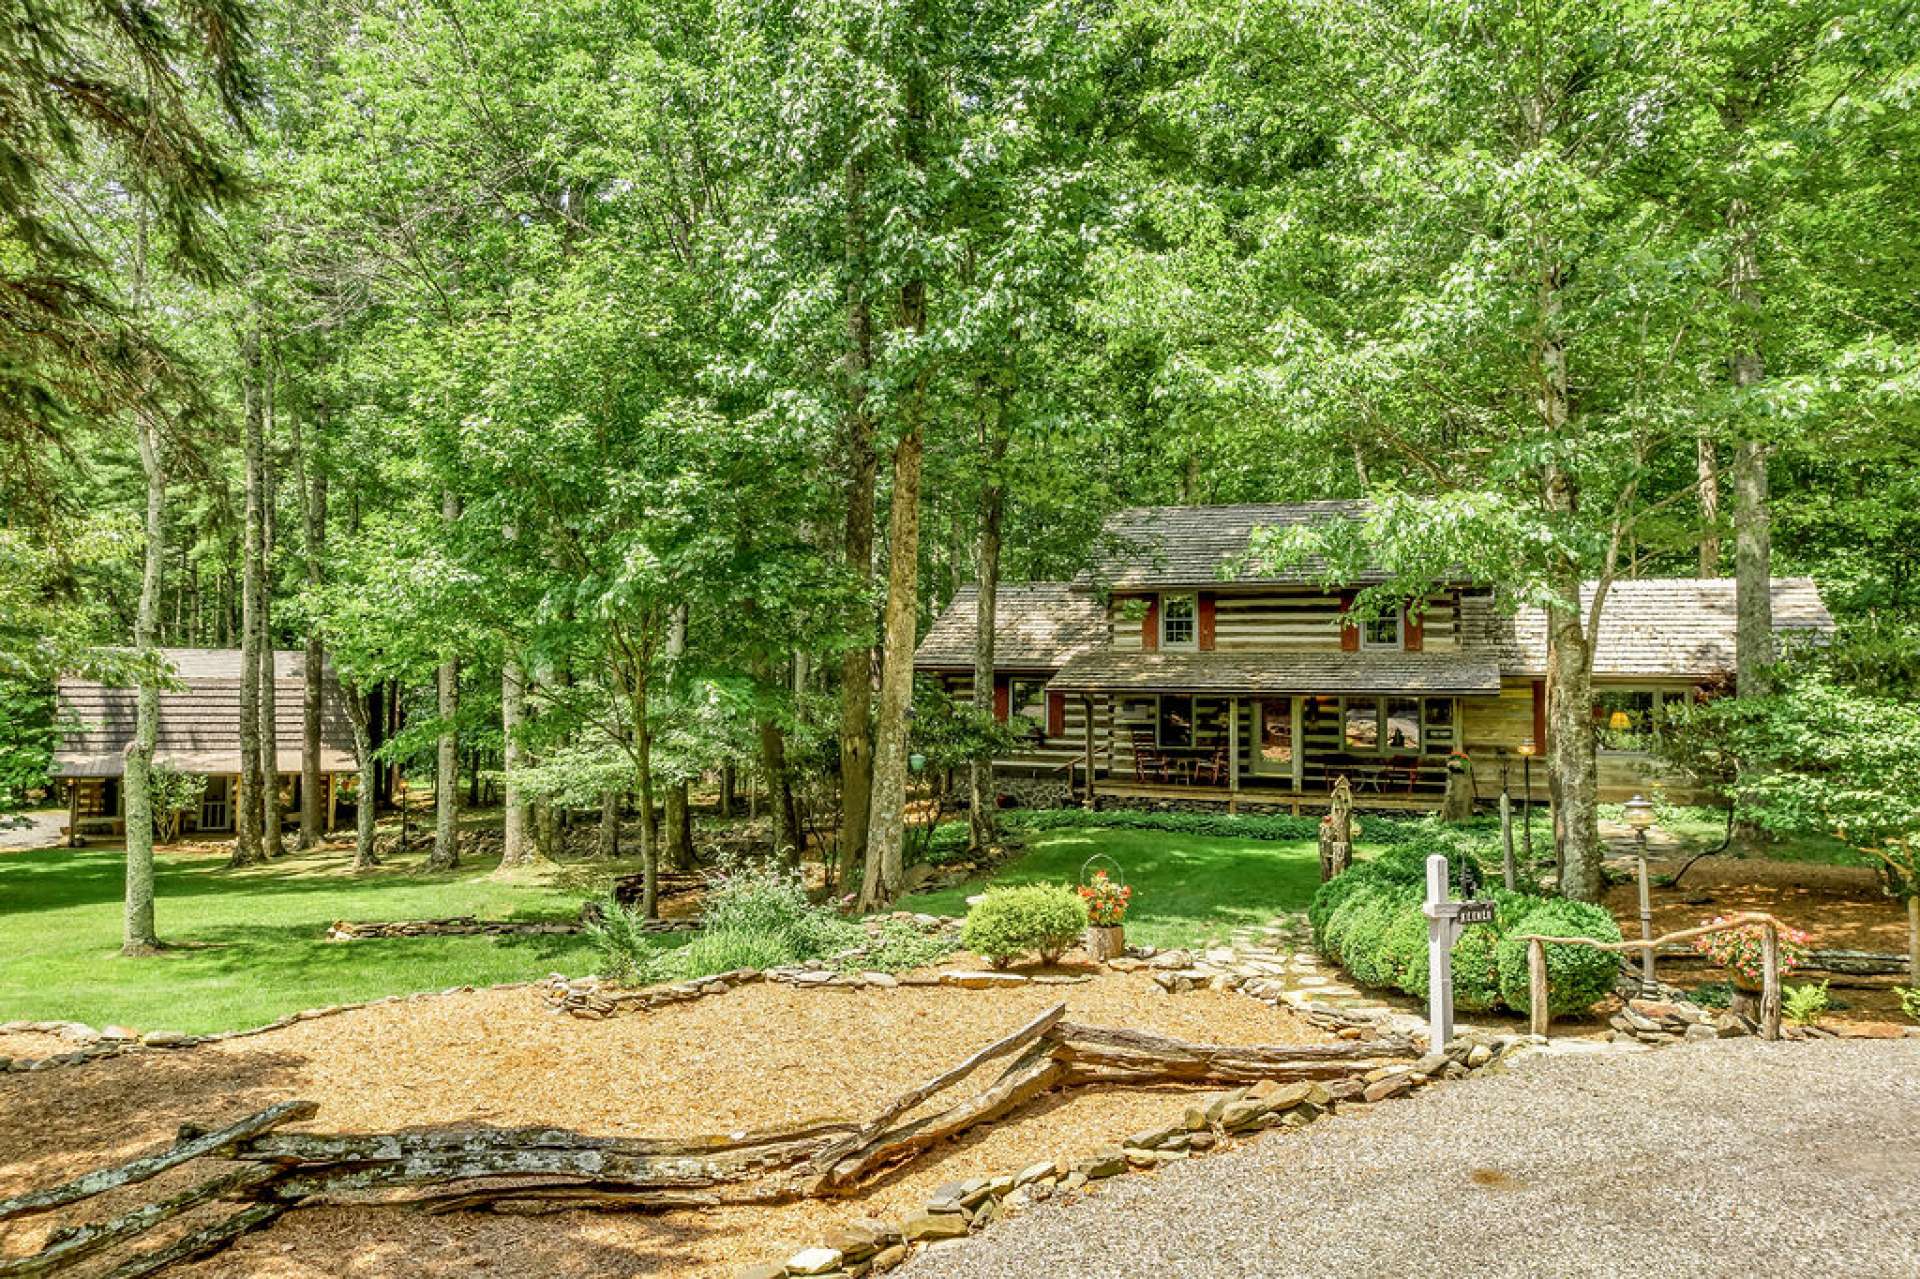 This property is flanked with mature trees blended with flagstone paths leading you down a path of lush foliage to the front door.